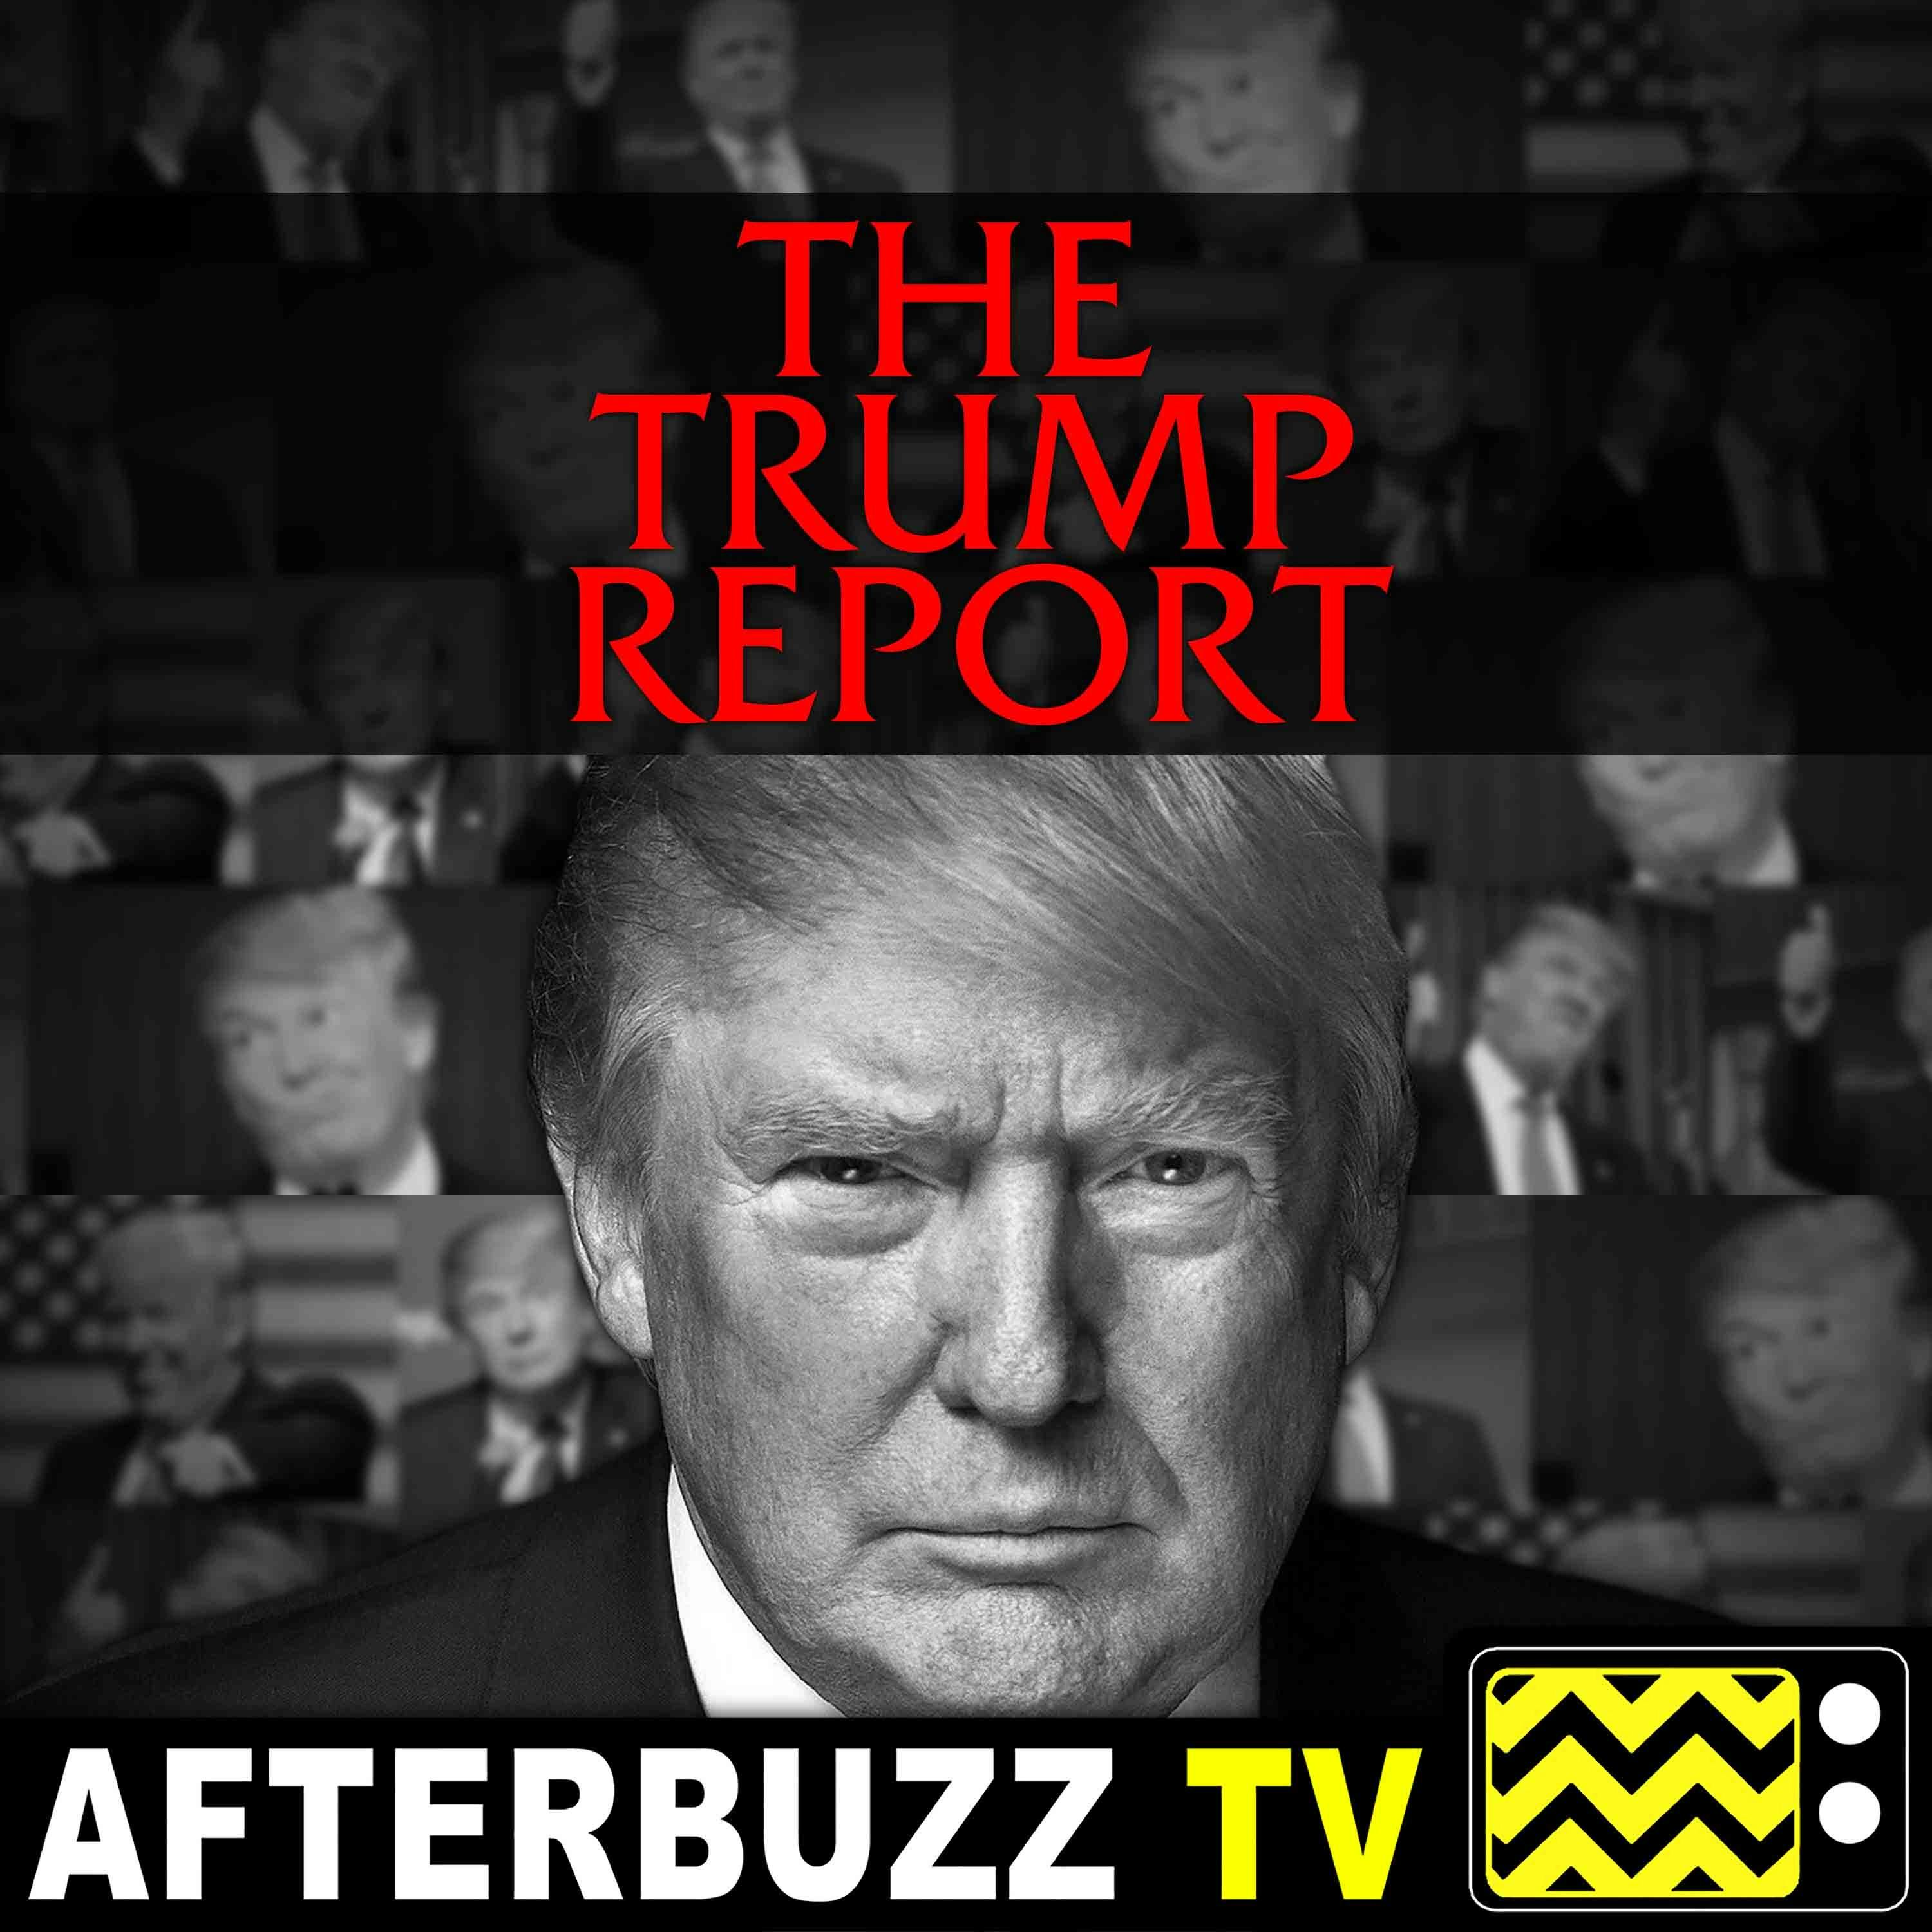 The Trump Report | My Way | AfterBuzz TV